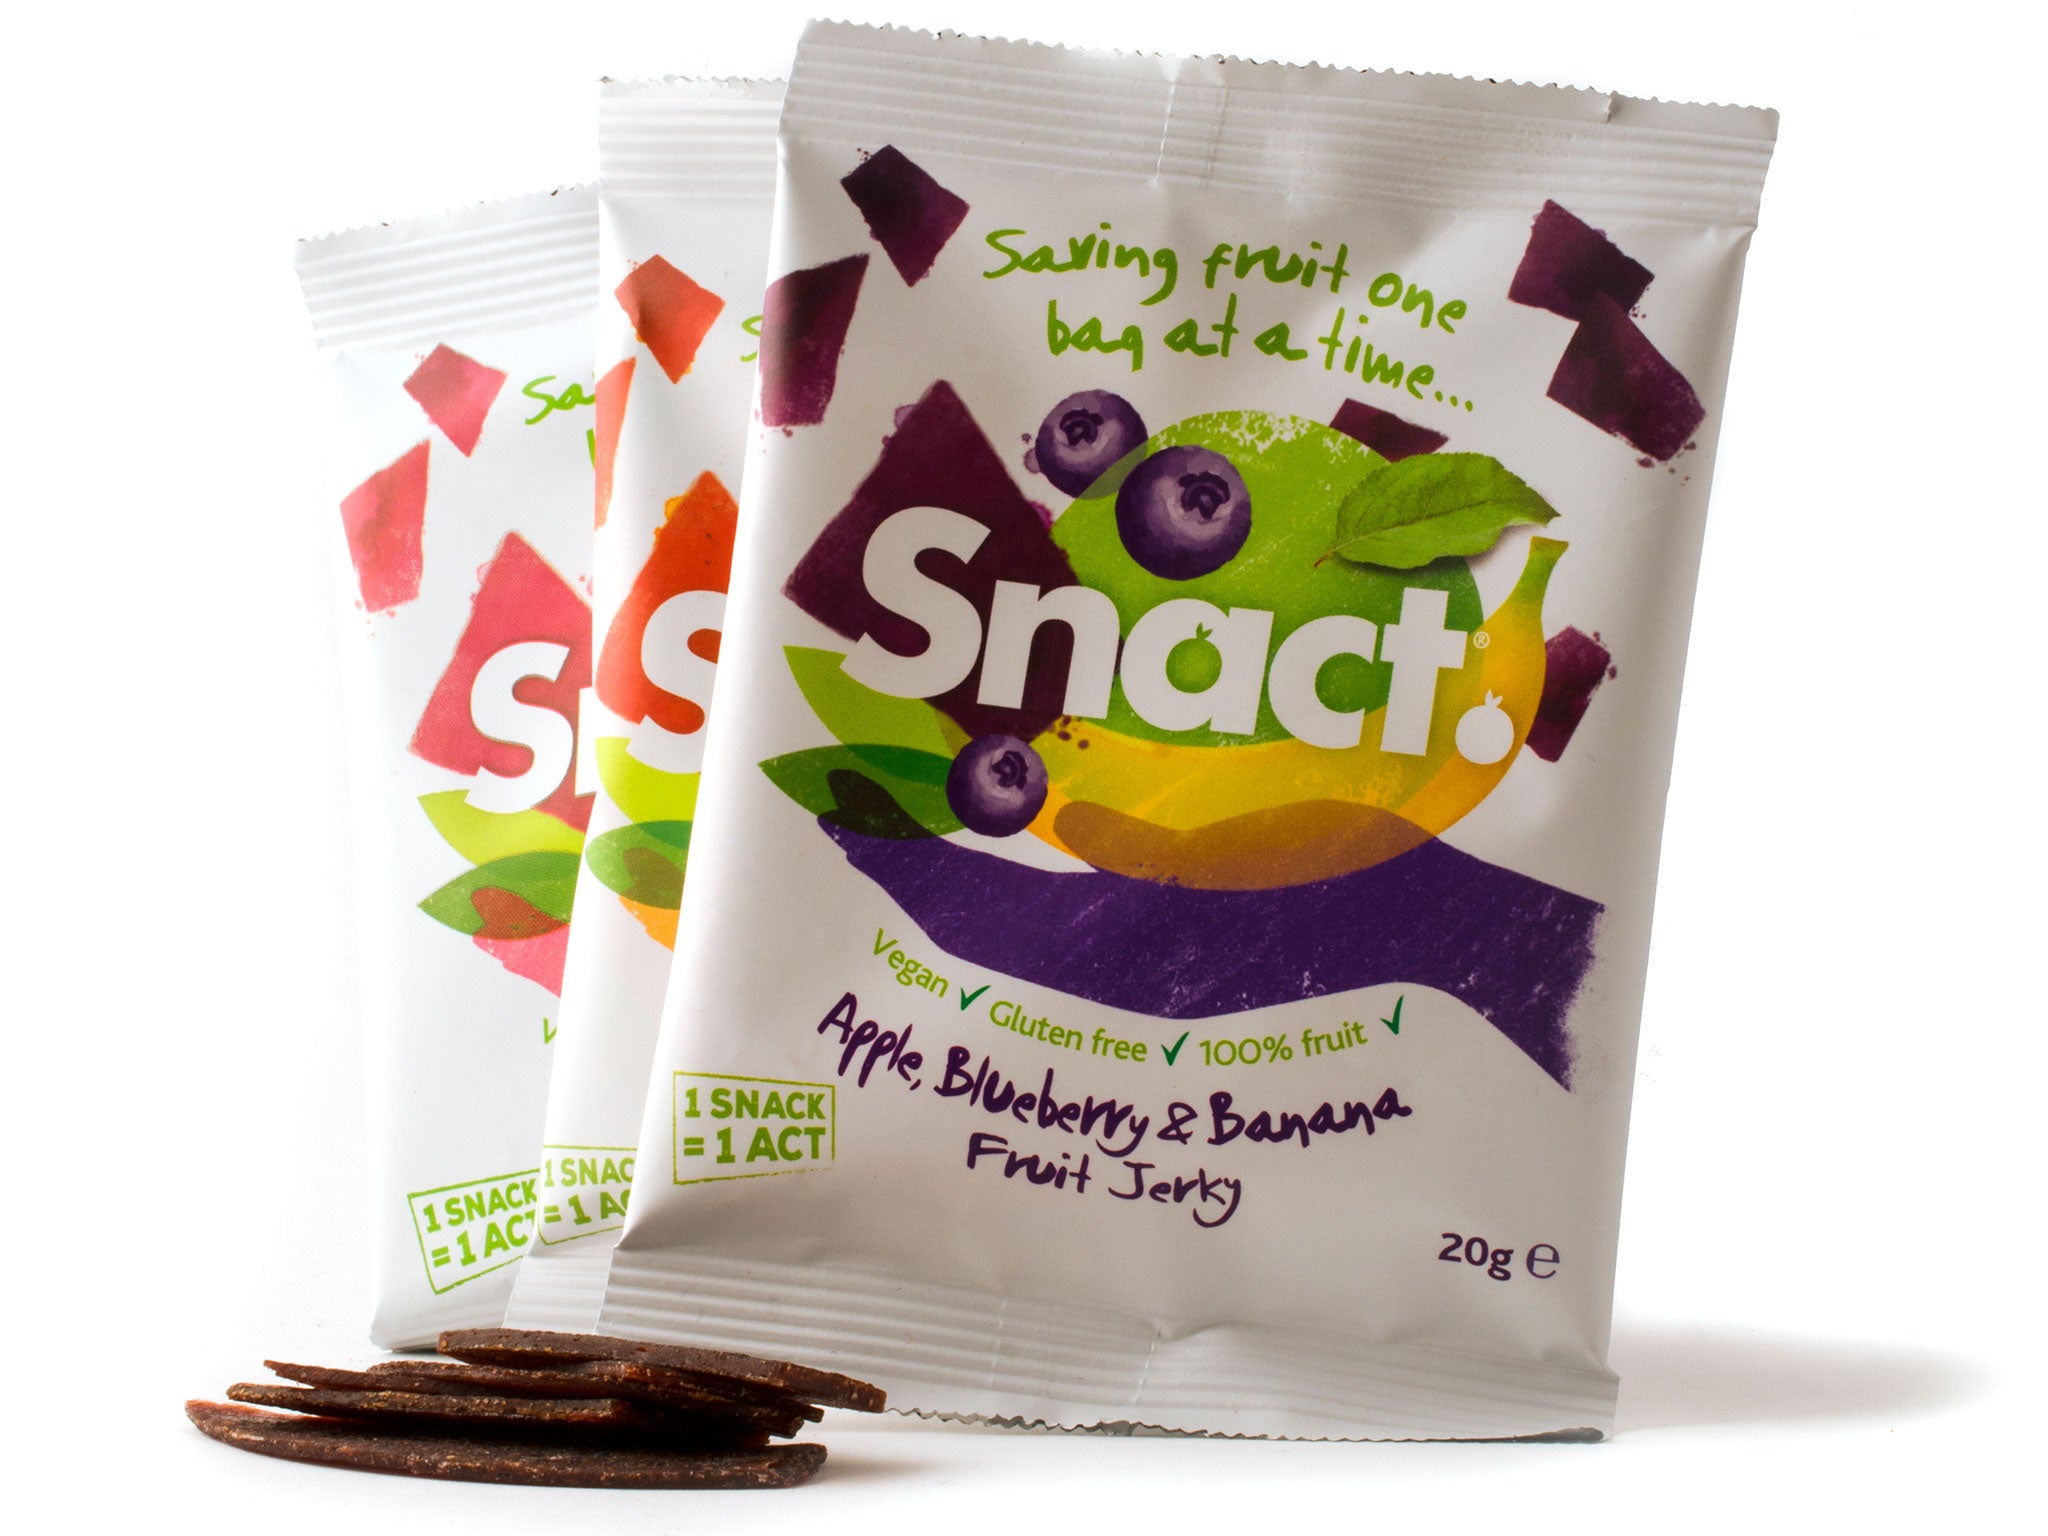 Snact is made using surplus fruit sourced from farmers and packing sites